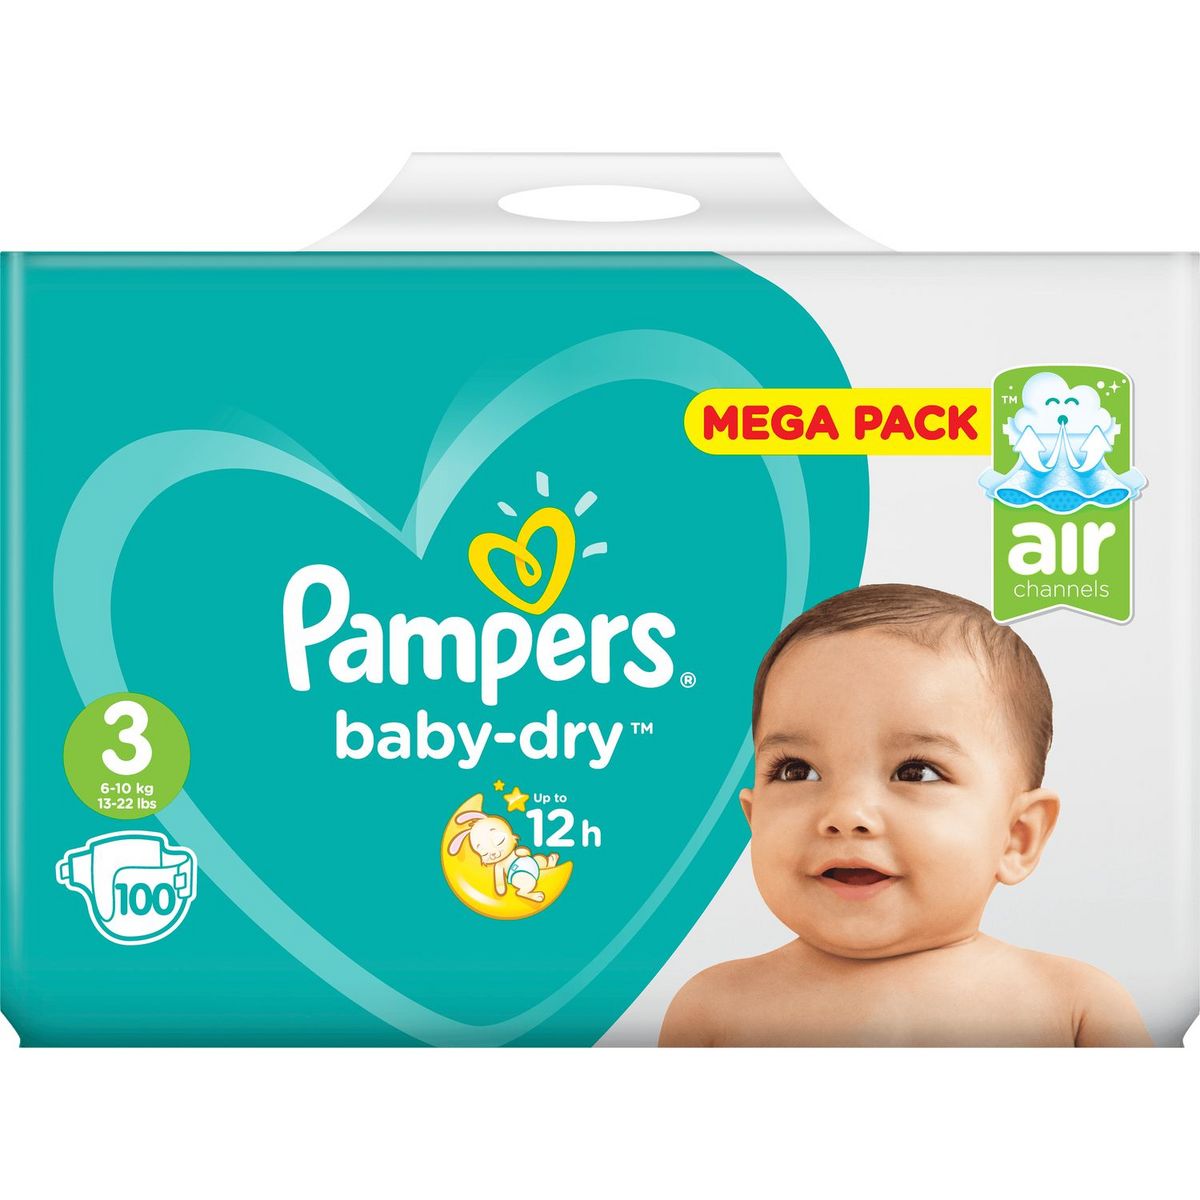 PAMPERS Baby-dry mega pack couches taille 3 (5-9kg) 100 pas cher - Auchan.fr